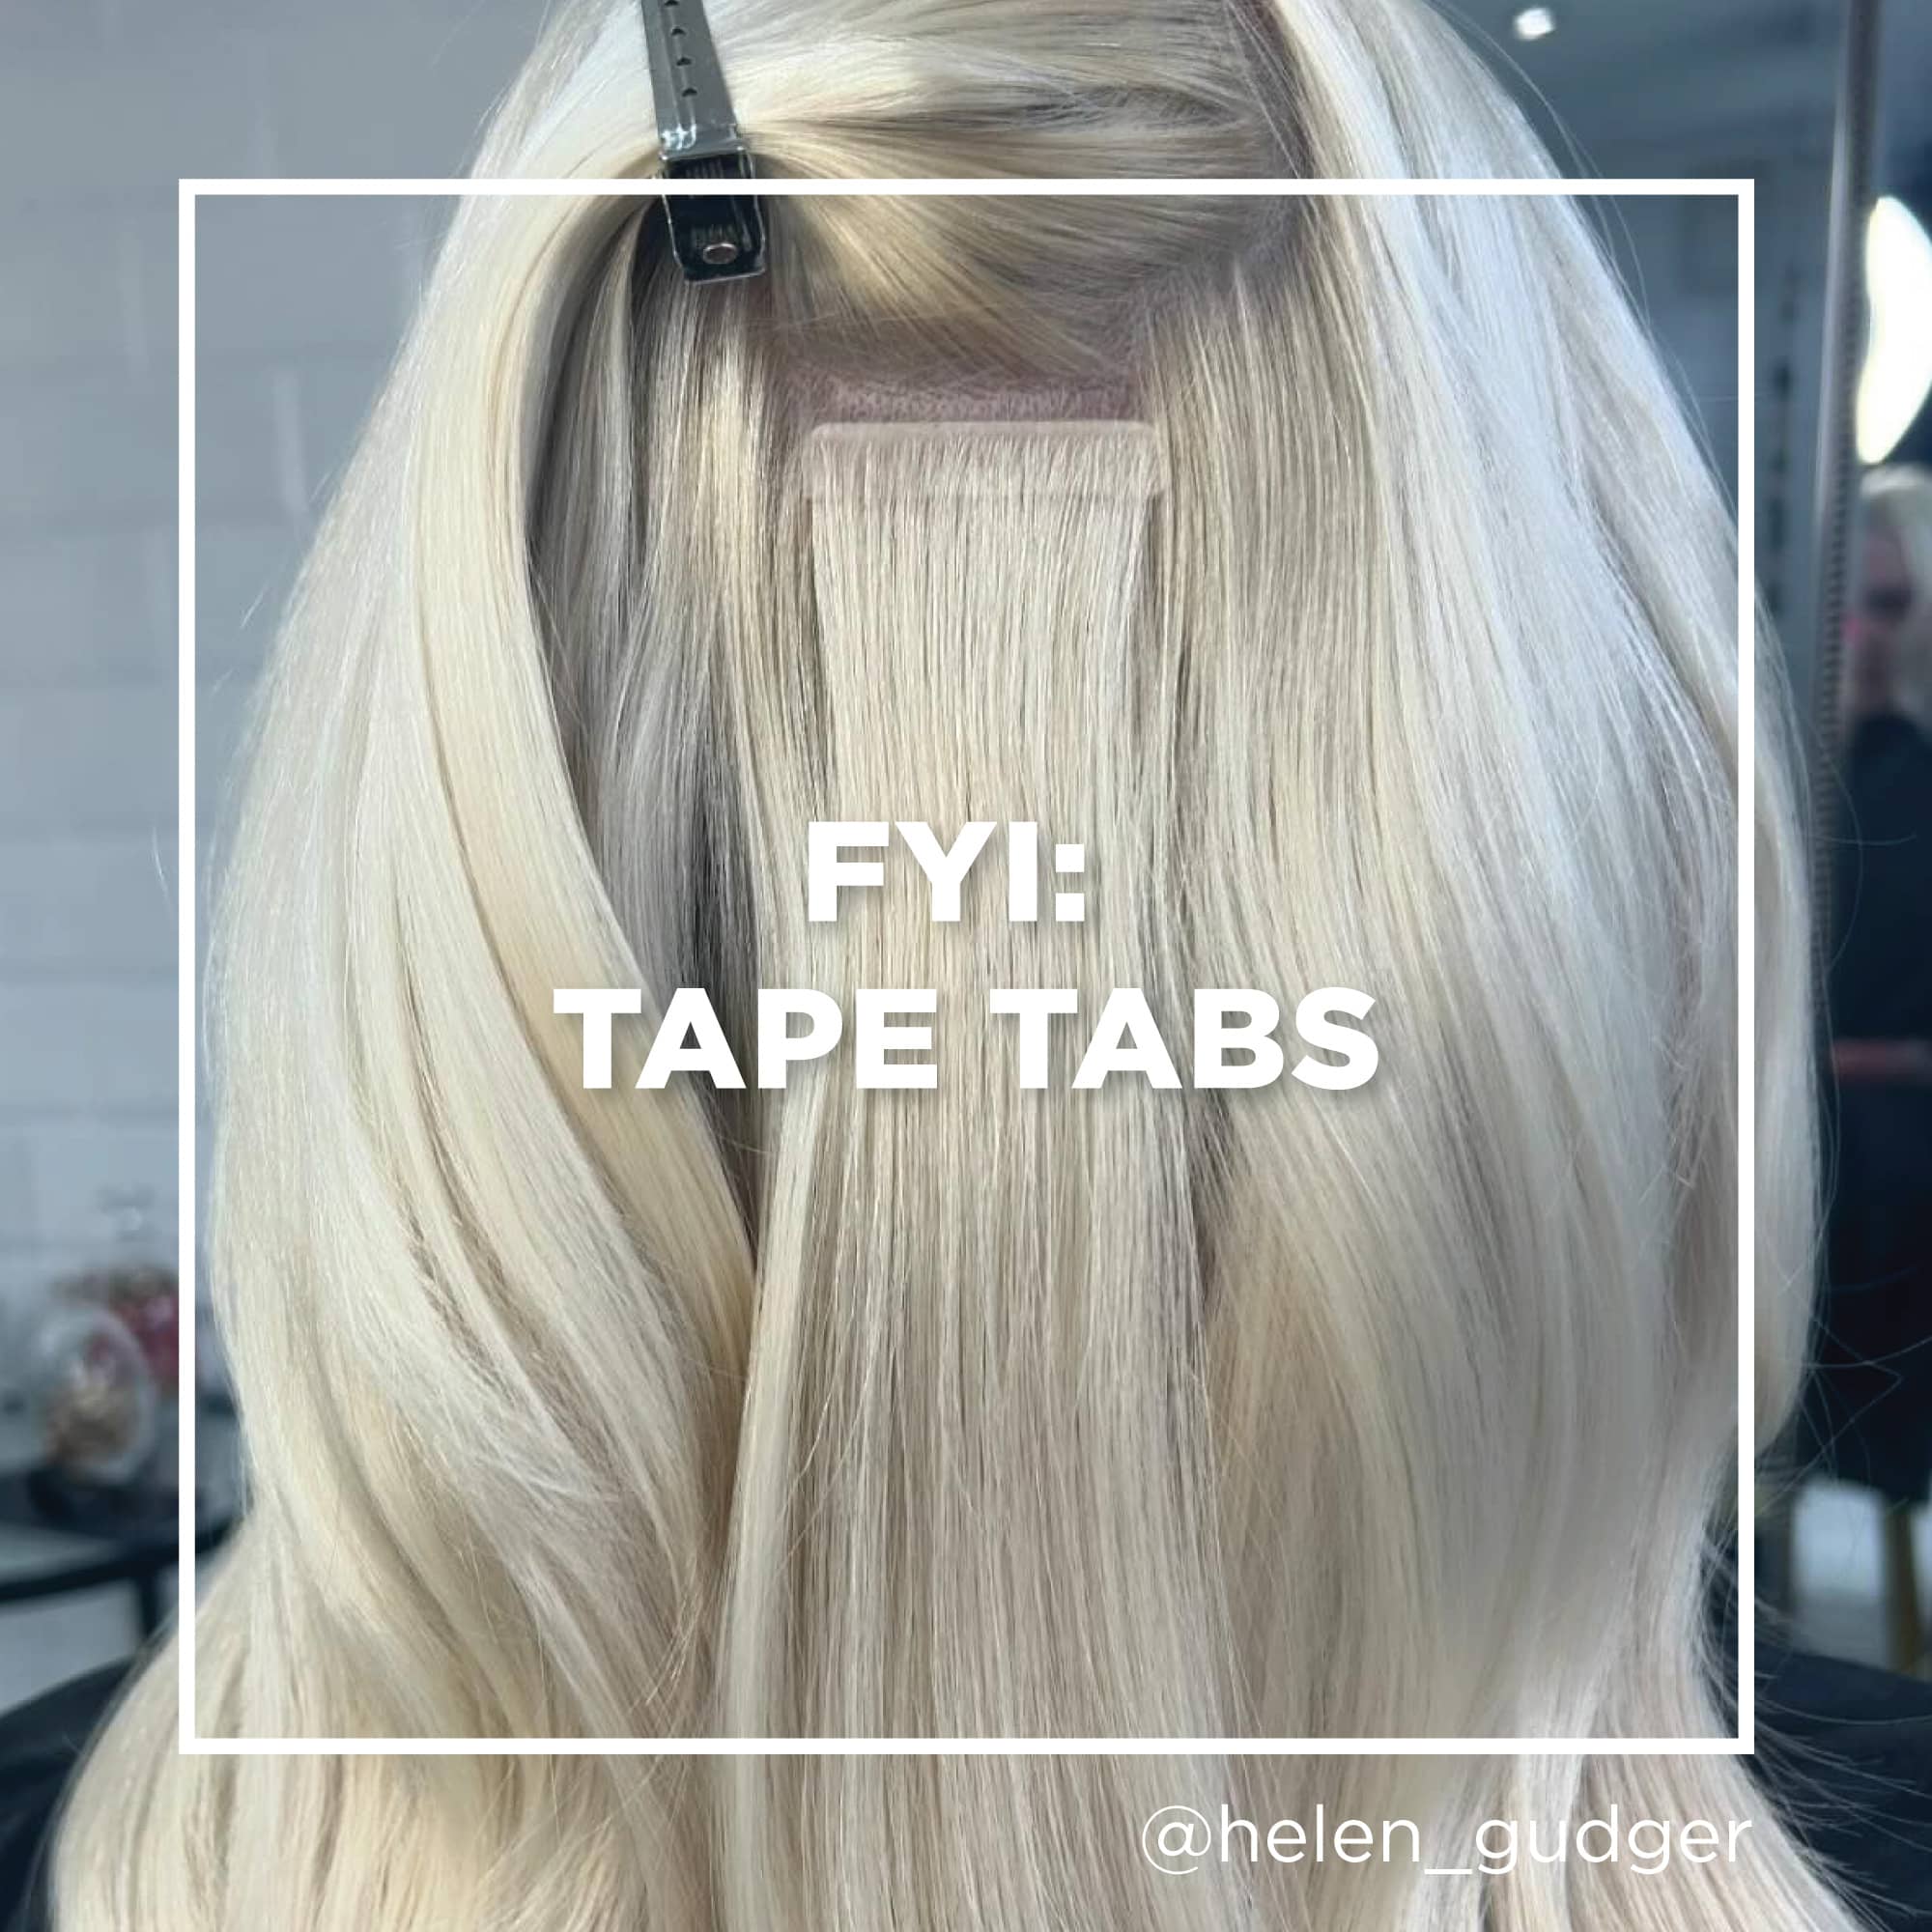 Everything You Need To Know About Tape Tabs